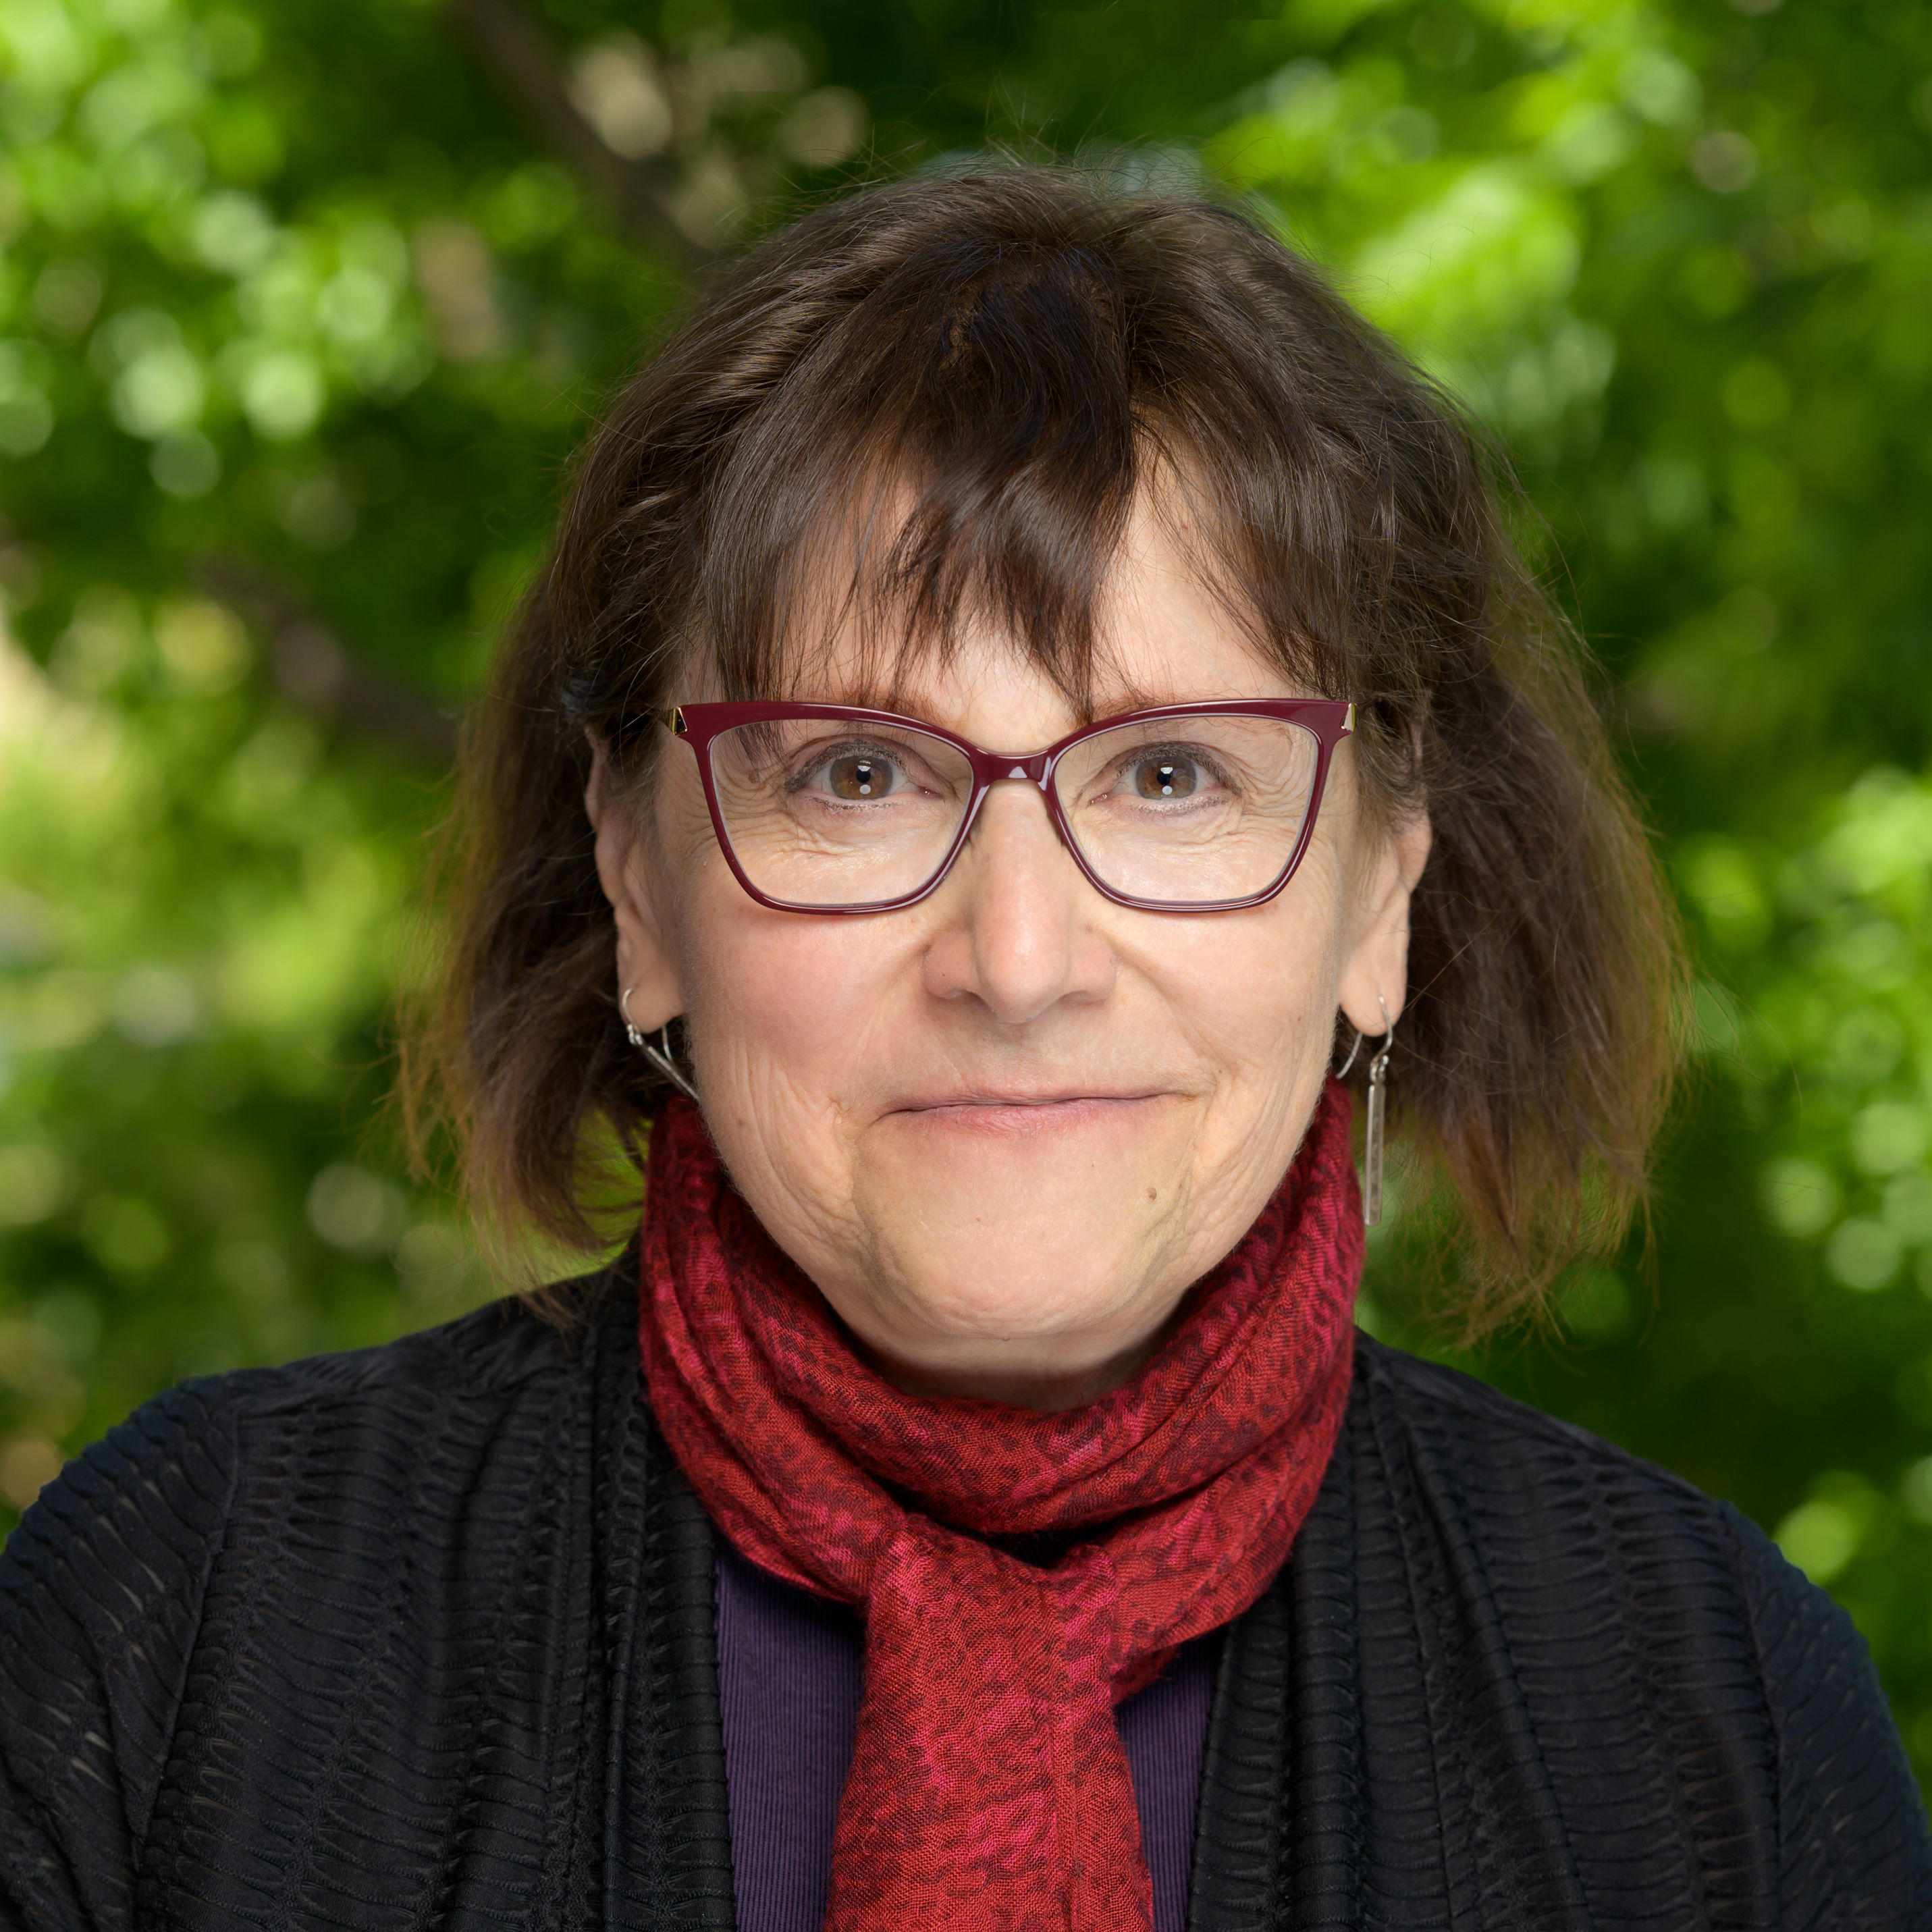 Sharon is smiling and looking at the camera. She has short brown hair with forehead bangs. She is wearing a red scarf,  burgundy glasses, vertical rectangular earrings, black cardigan, and purple shirt underneath. The background of the image is of blurred green nature. 